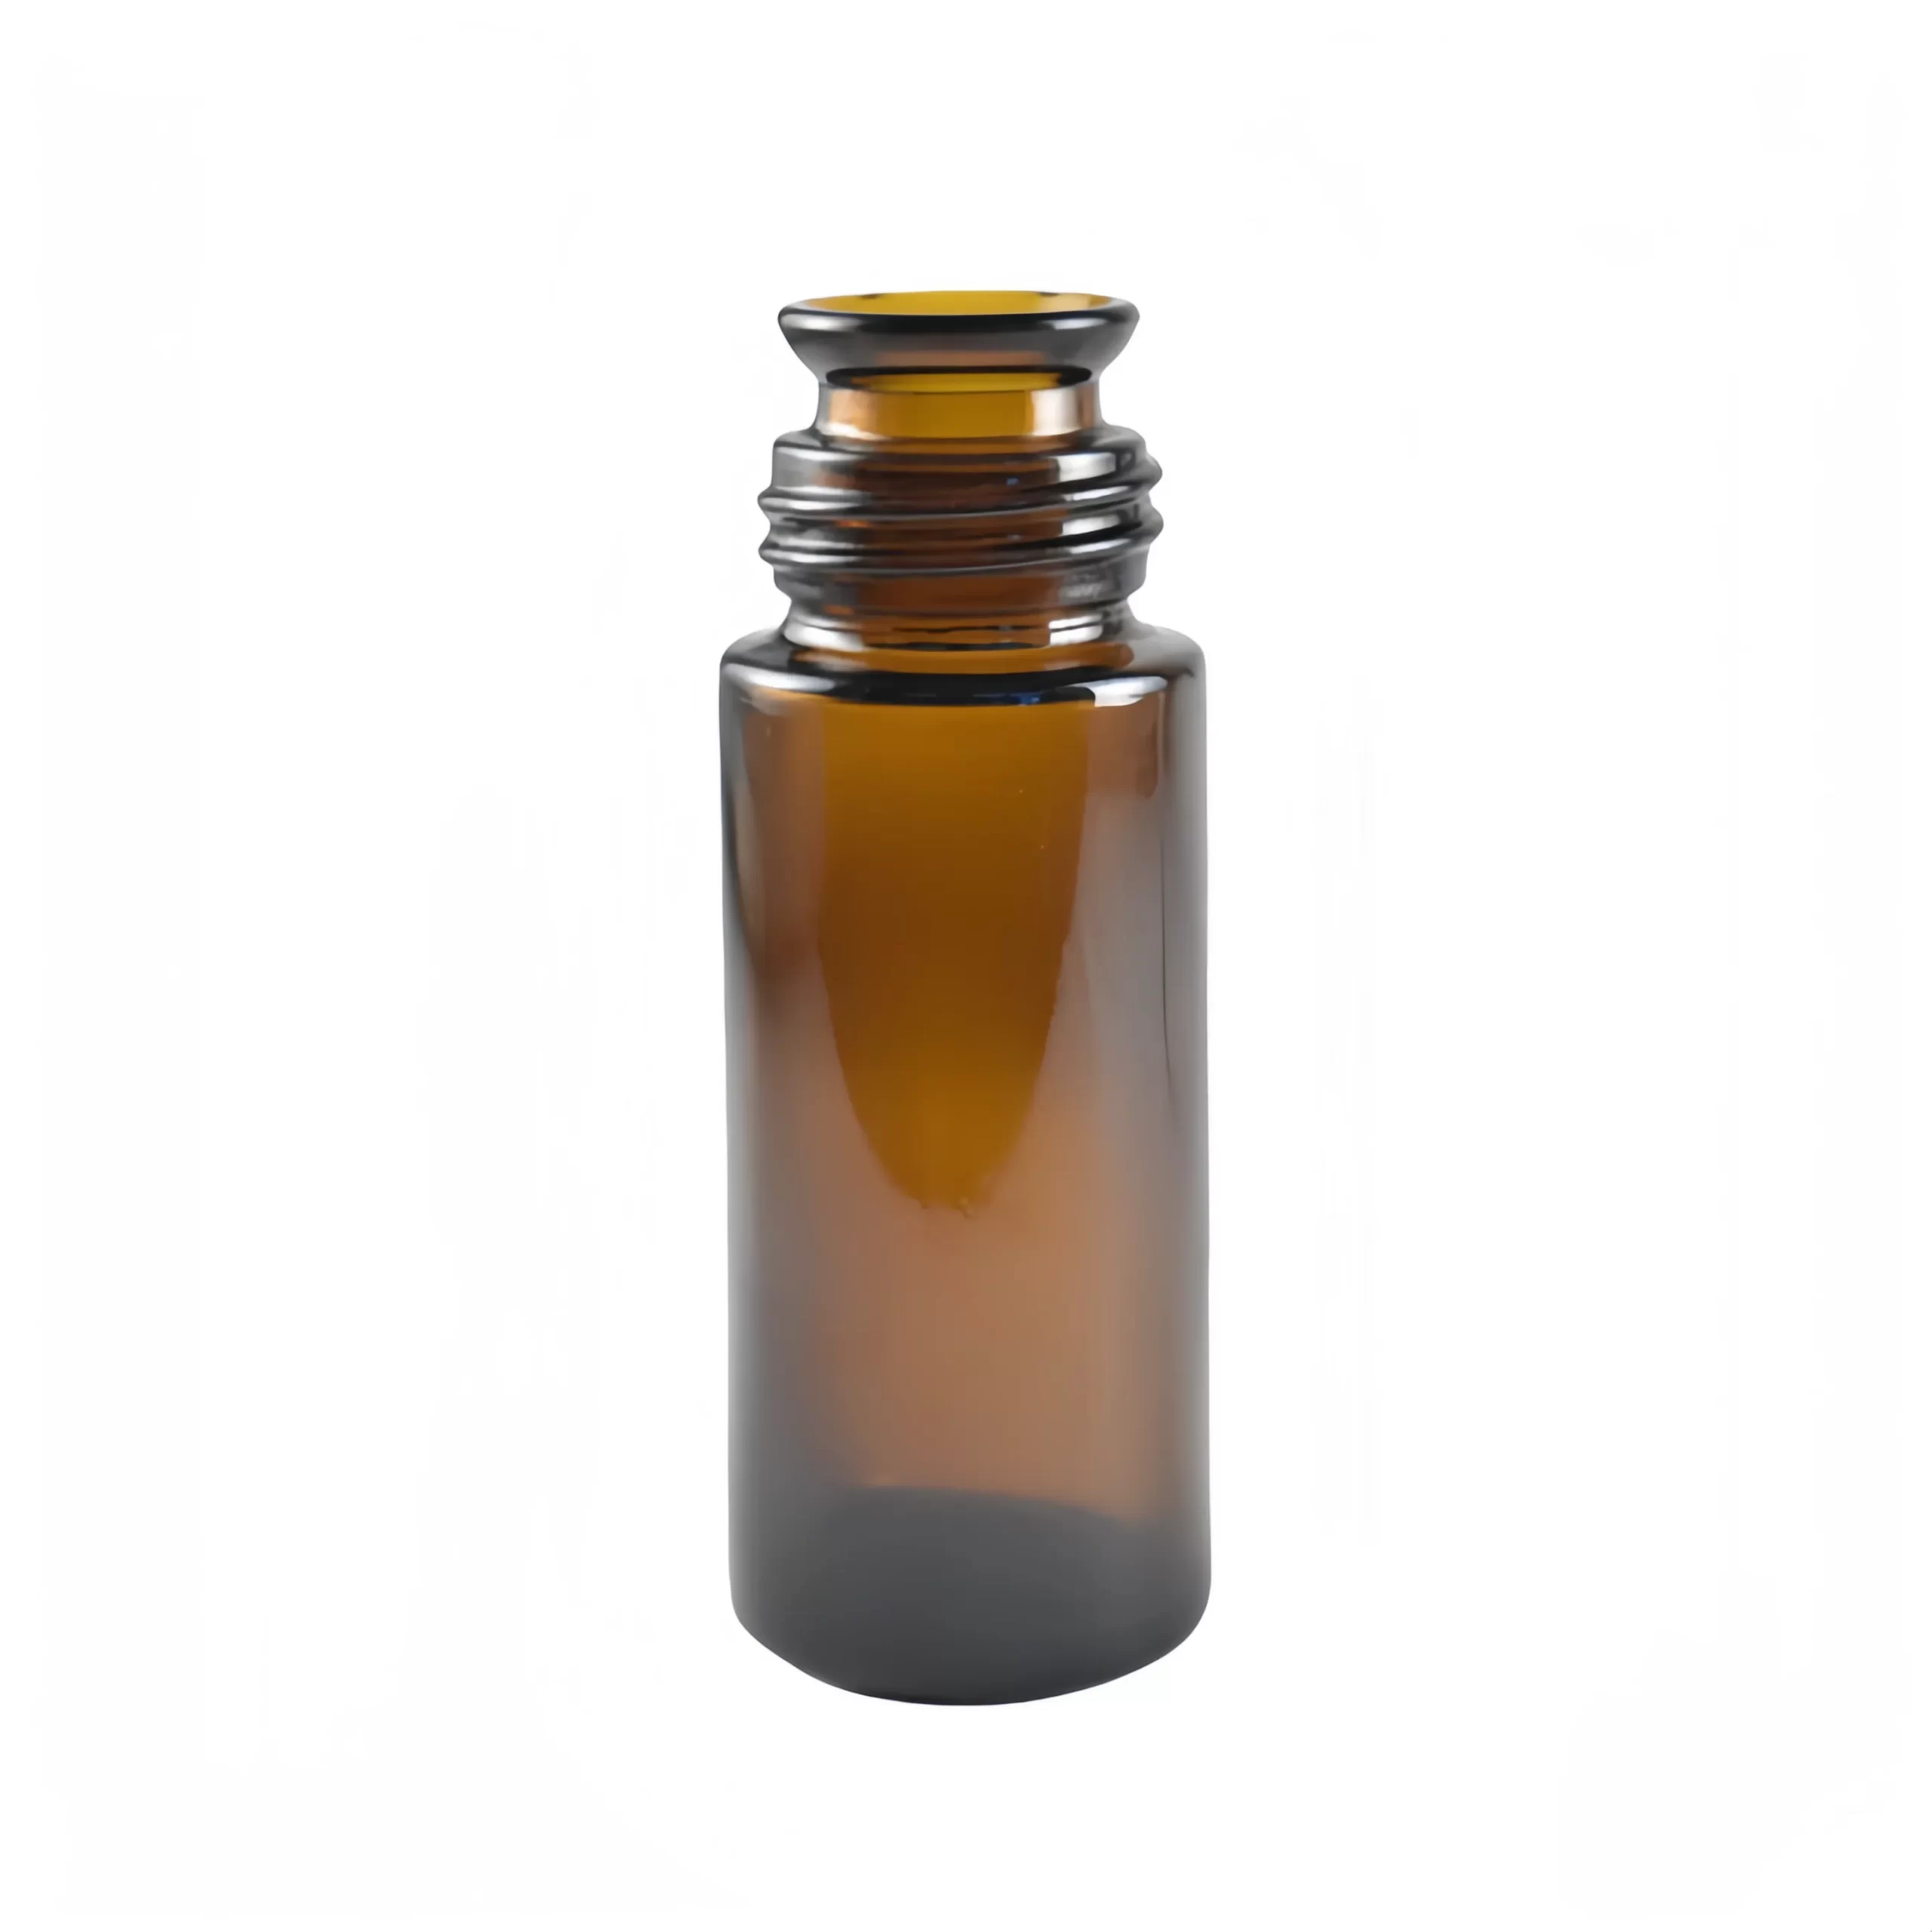 60ml pour out round glass bottle